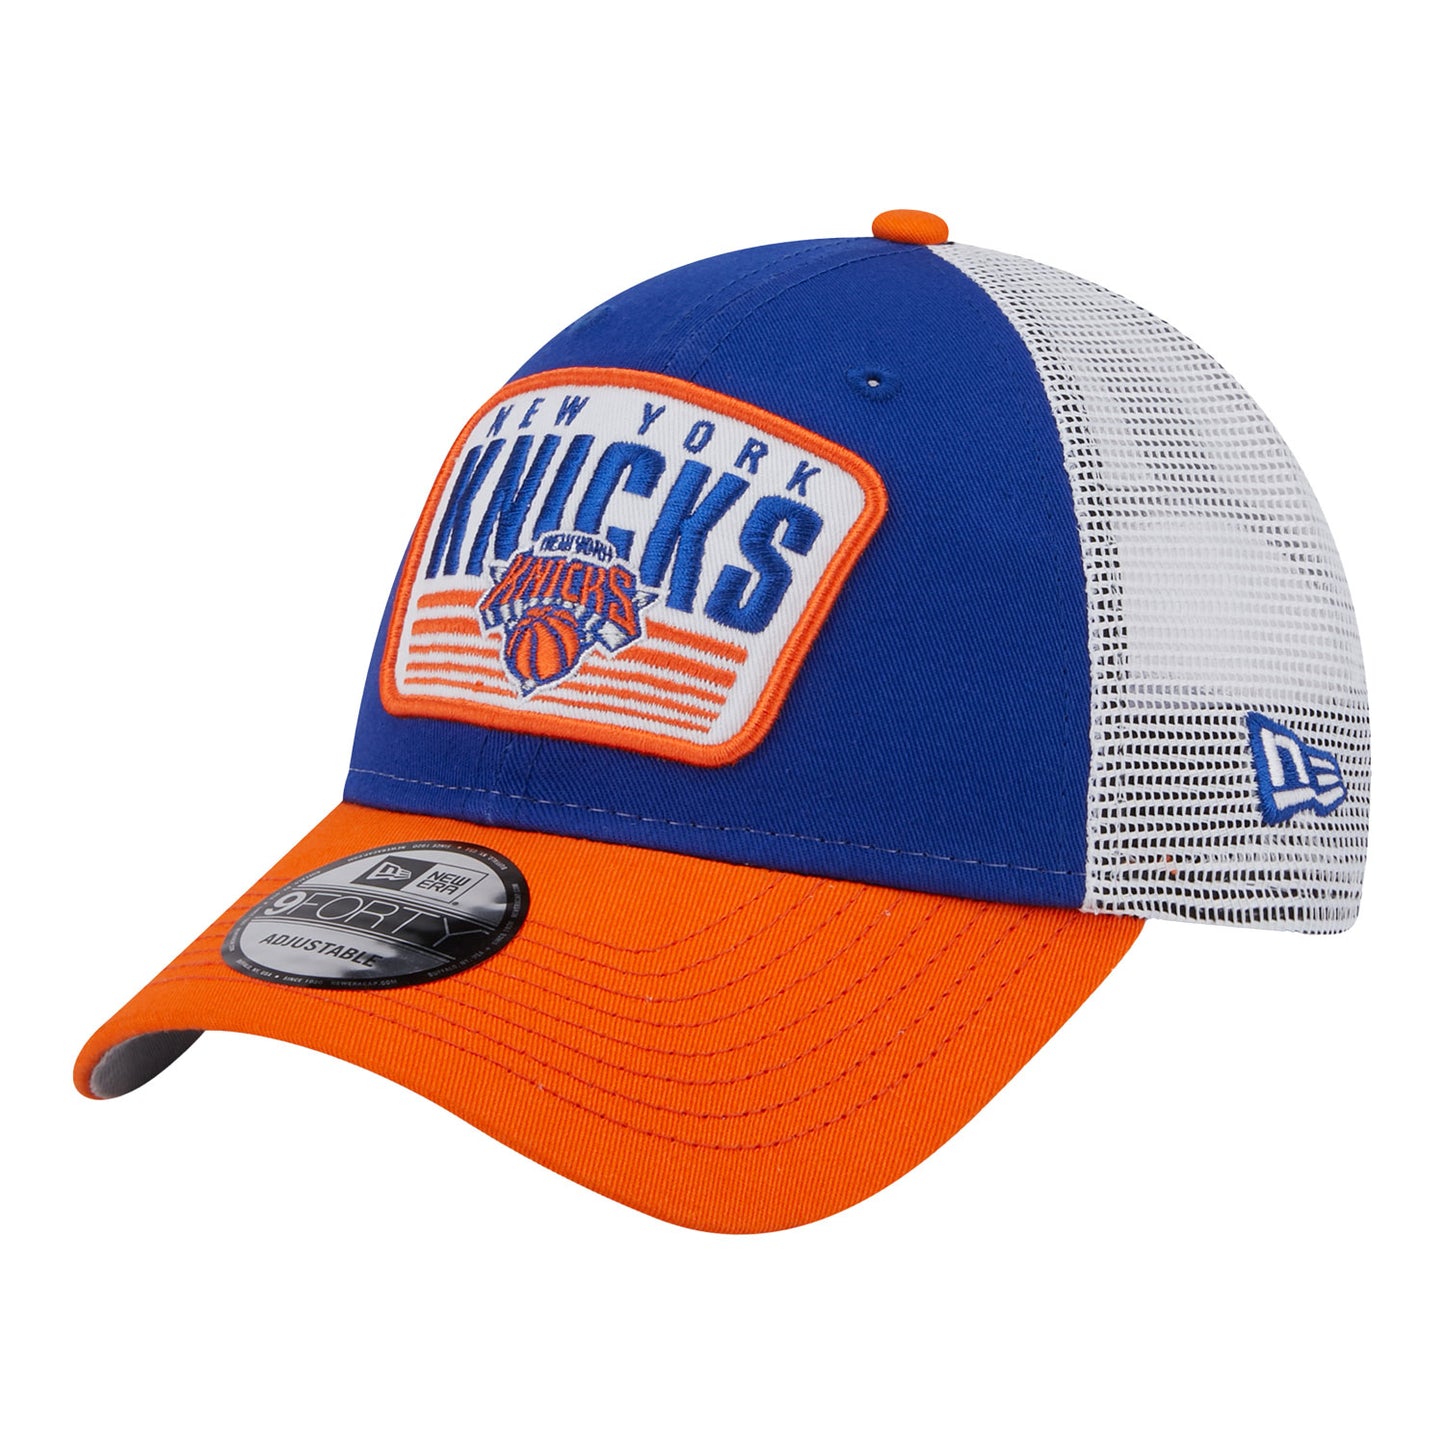 Youth New Era Knicks Two-Tone Patch Adjustable Hat - In Blue And Orange - Angled Left View